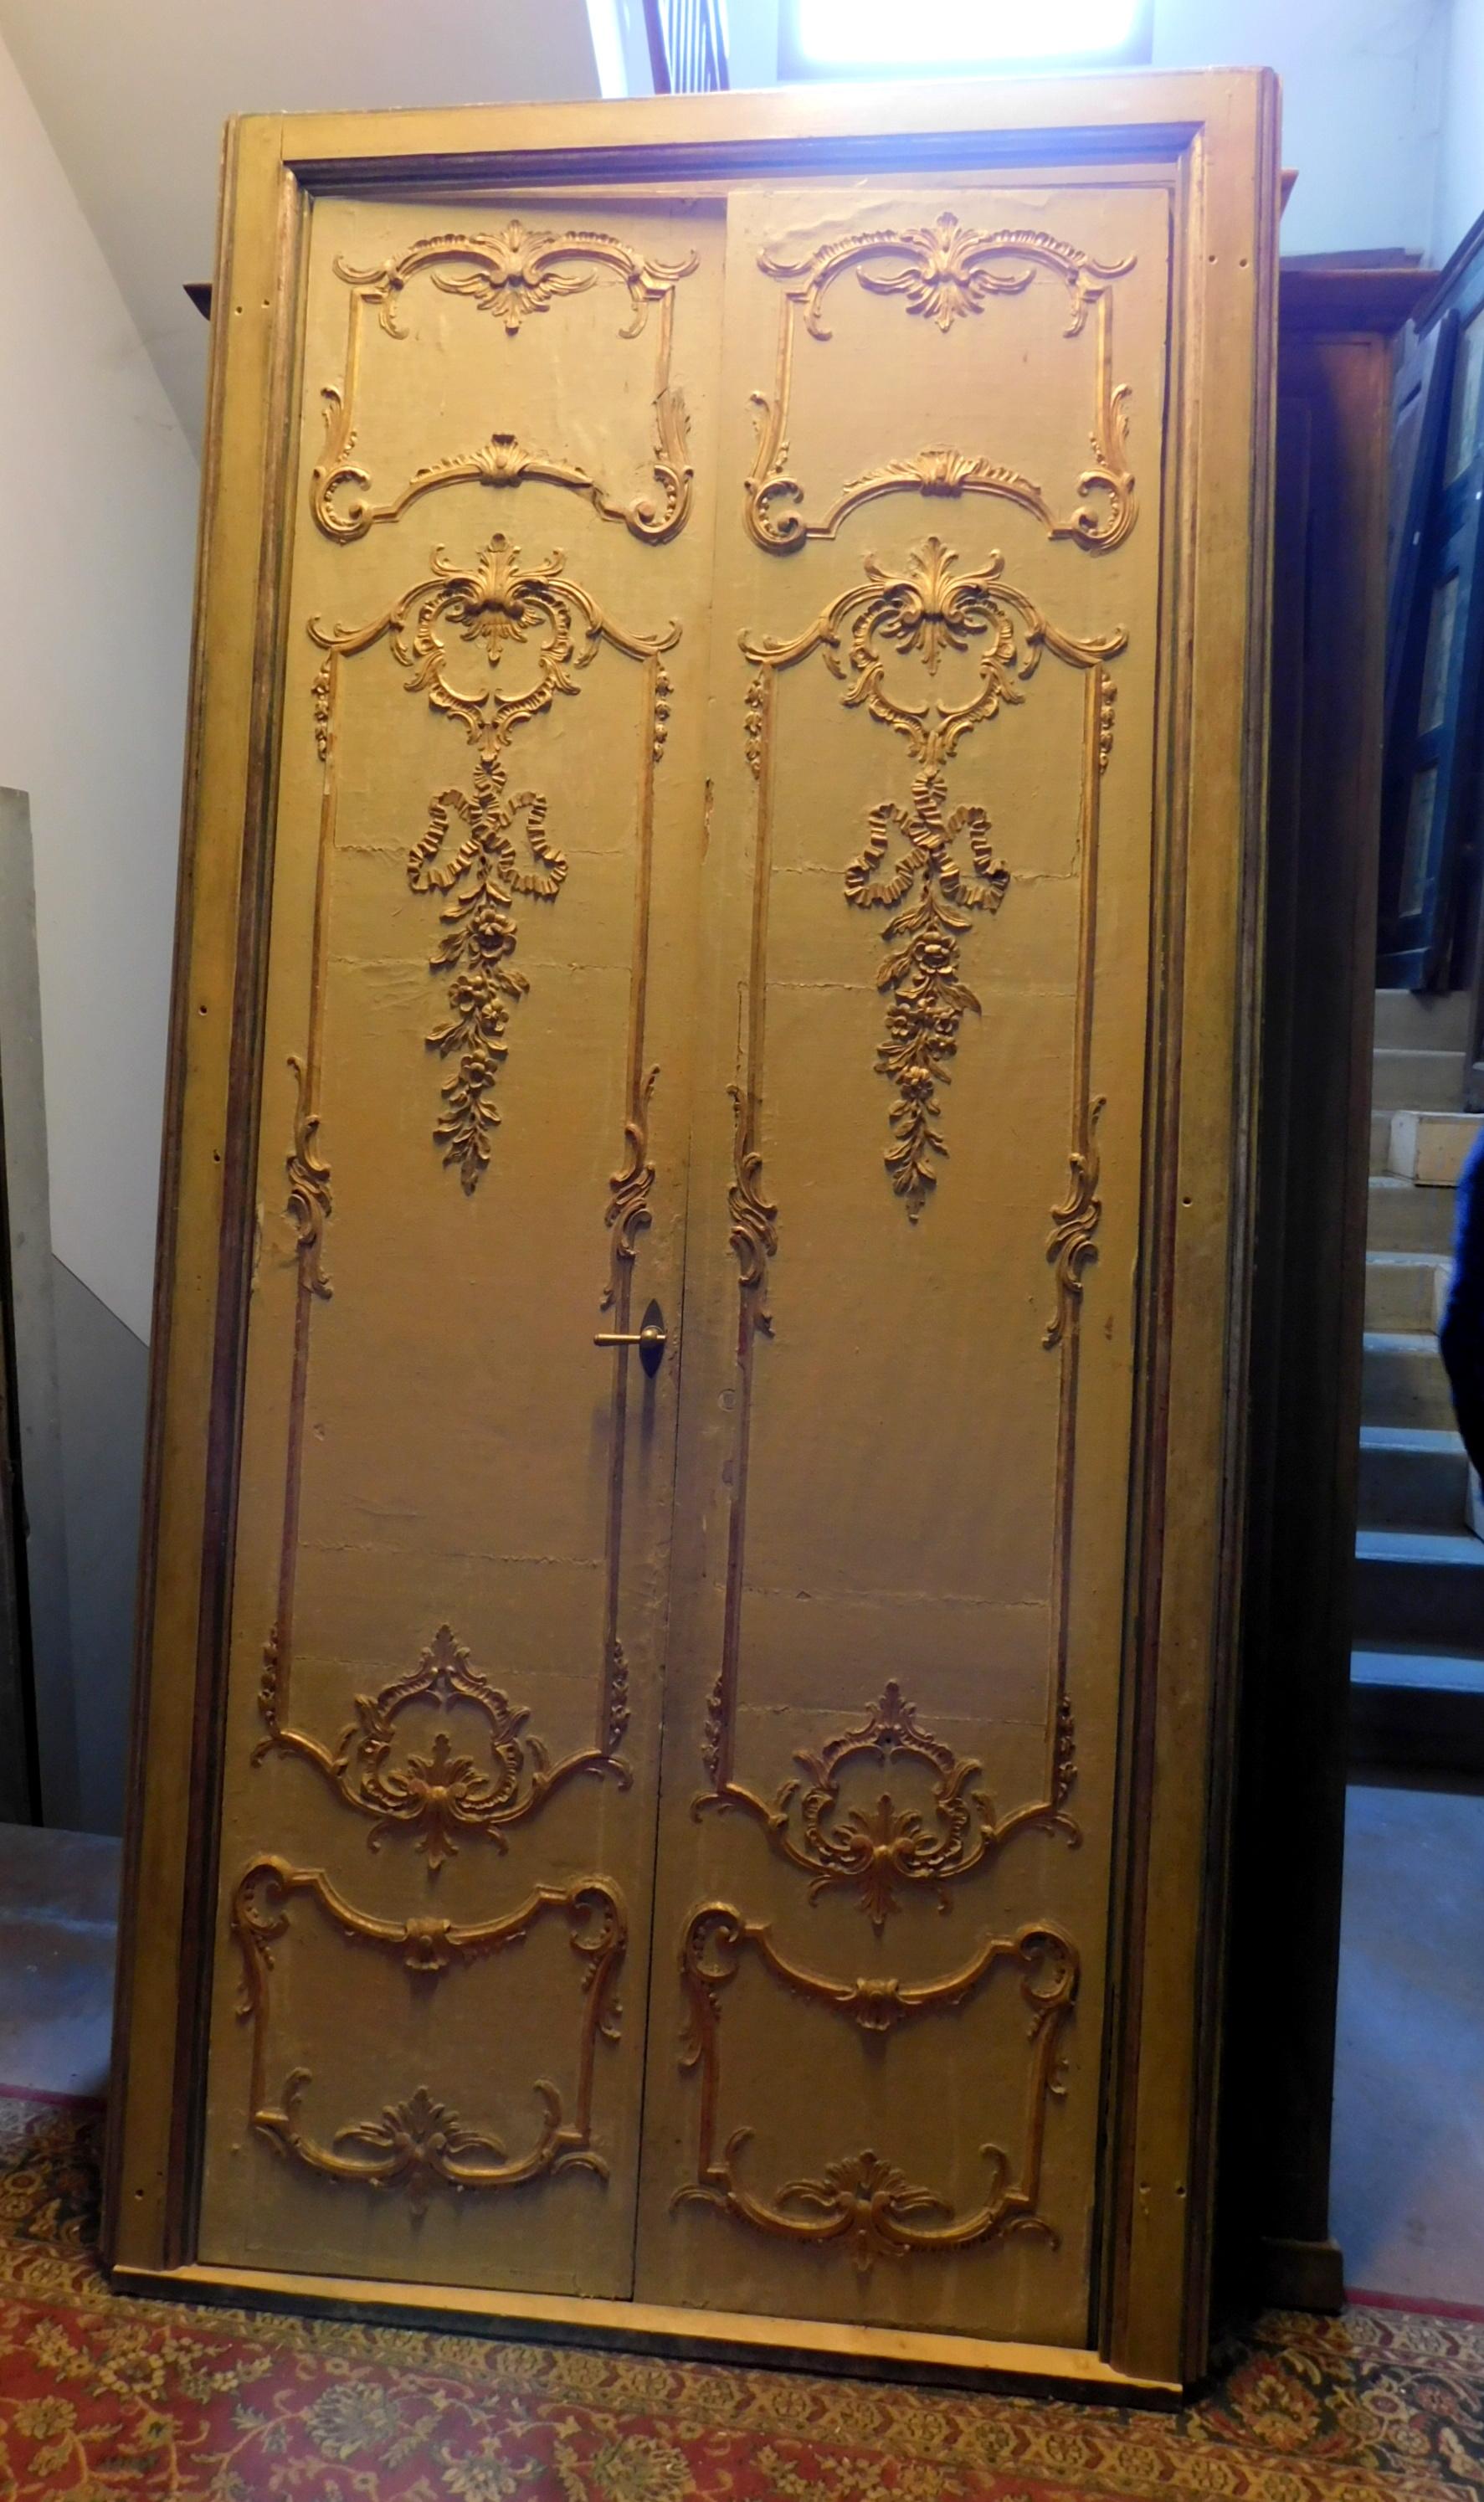 Gilt Antique Lacquered and Gilded Double Door with Frame, 19th Century, Milan 'Italy'